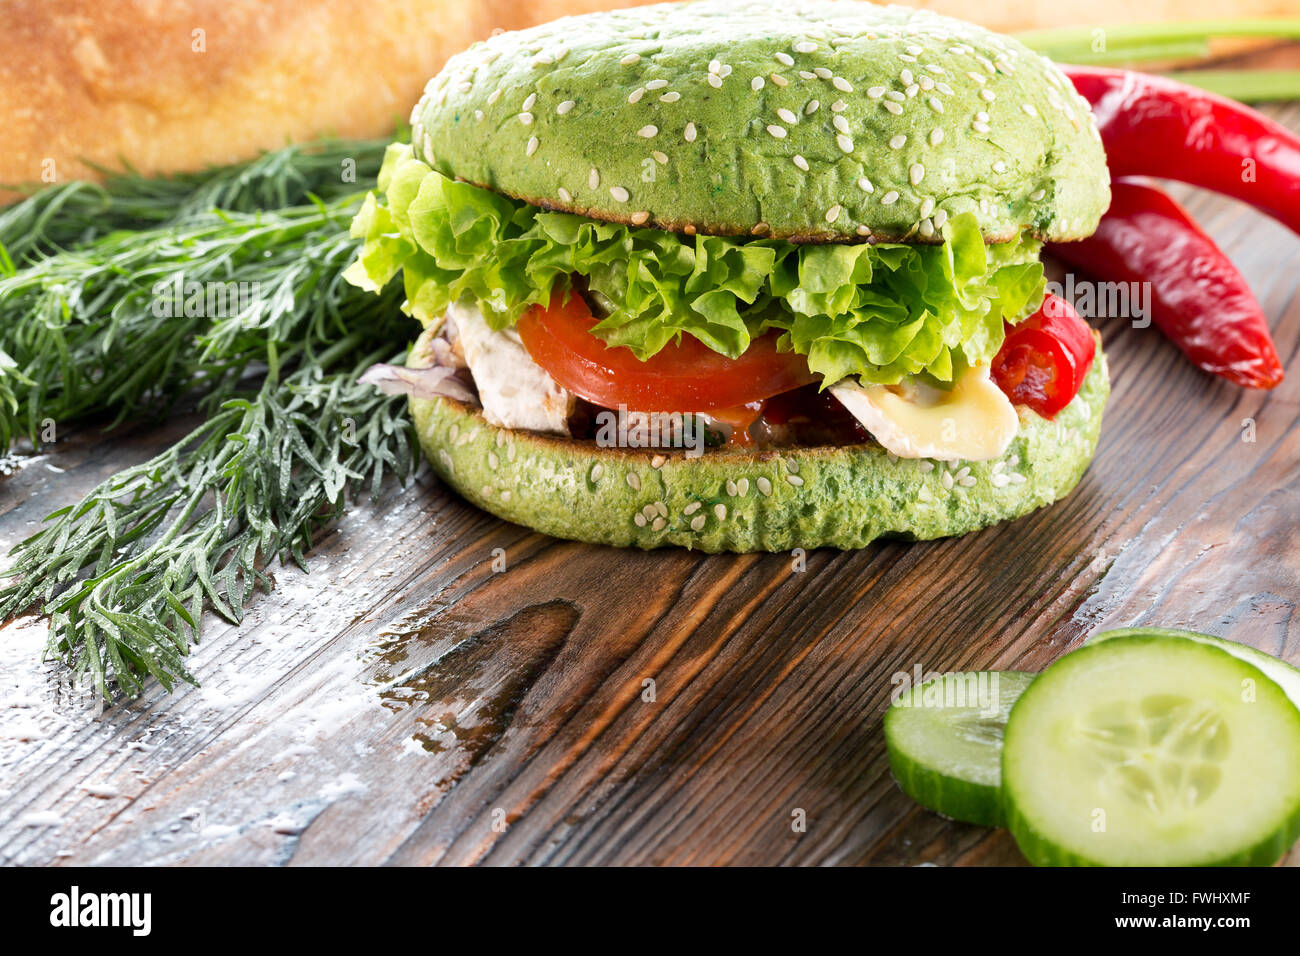 burger with green bun on wooden background. Stock Photo